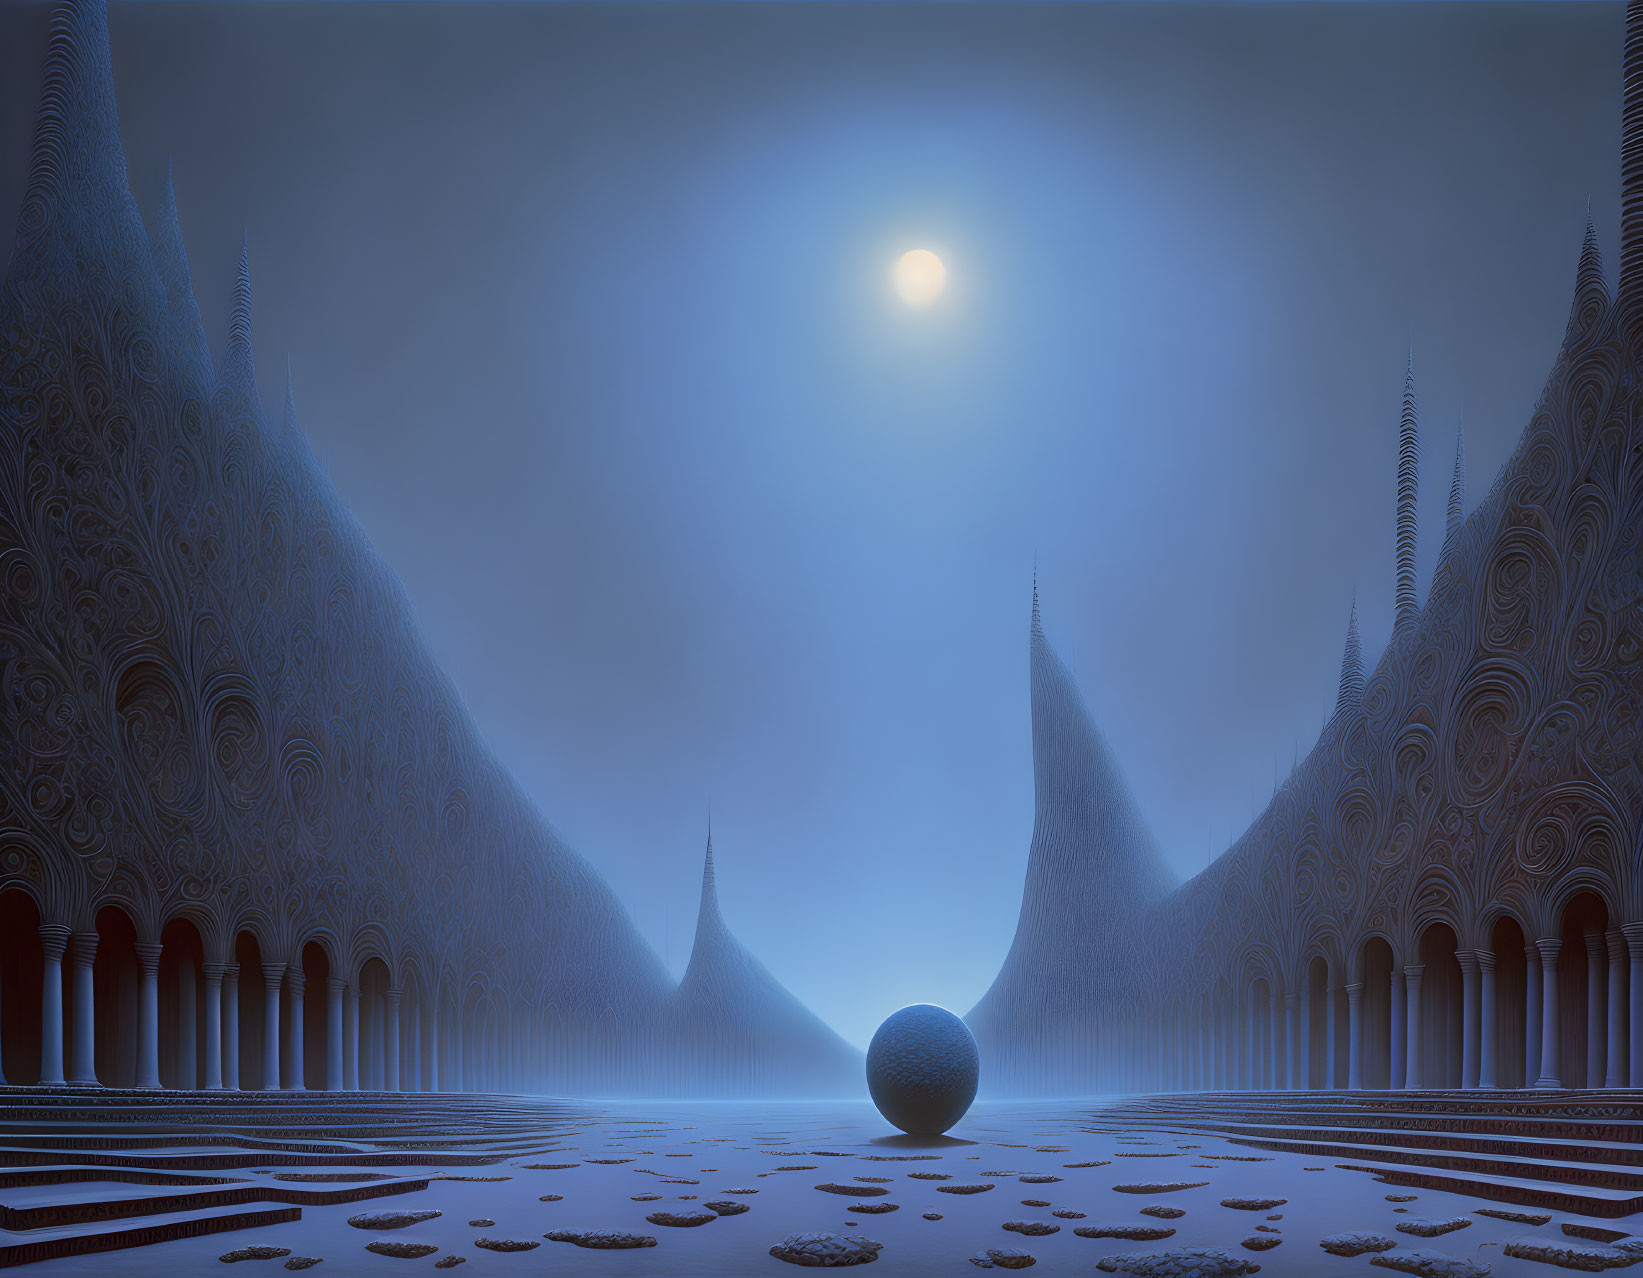 Surreal landscape with towering spires and central sphere under moonlit sky